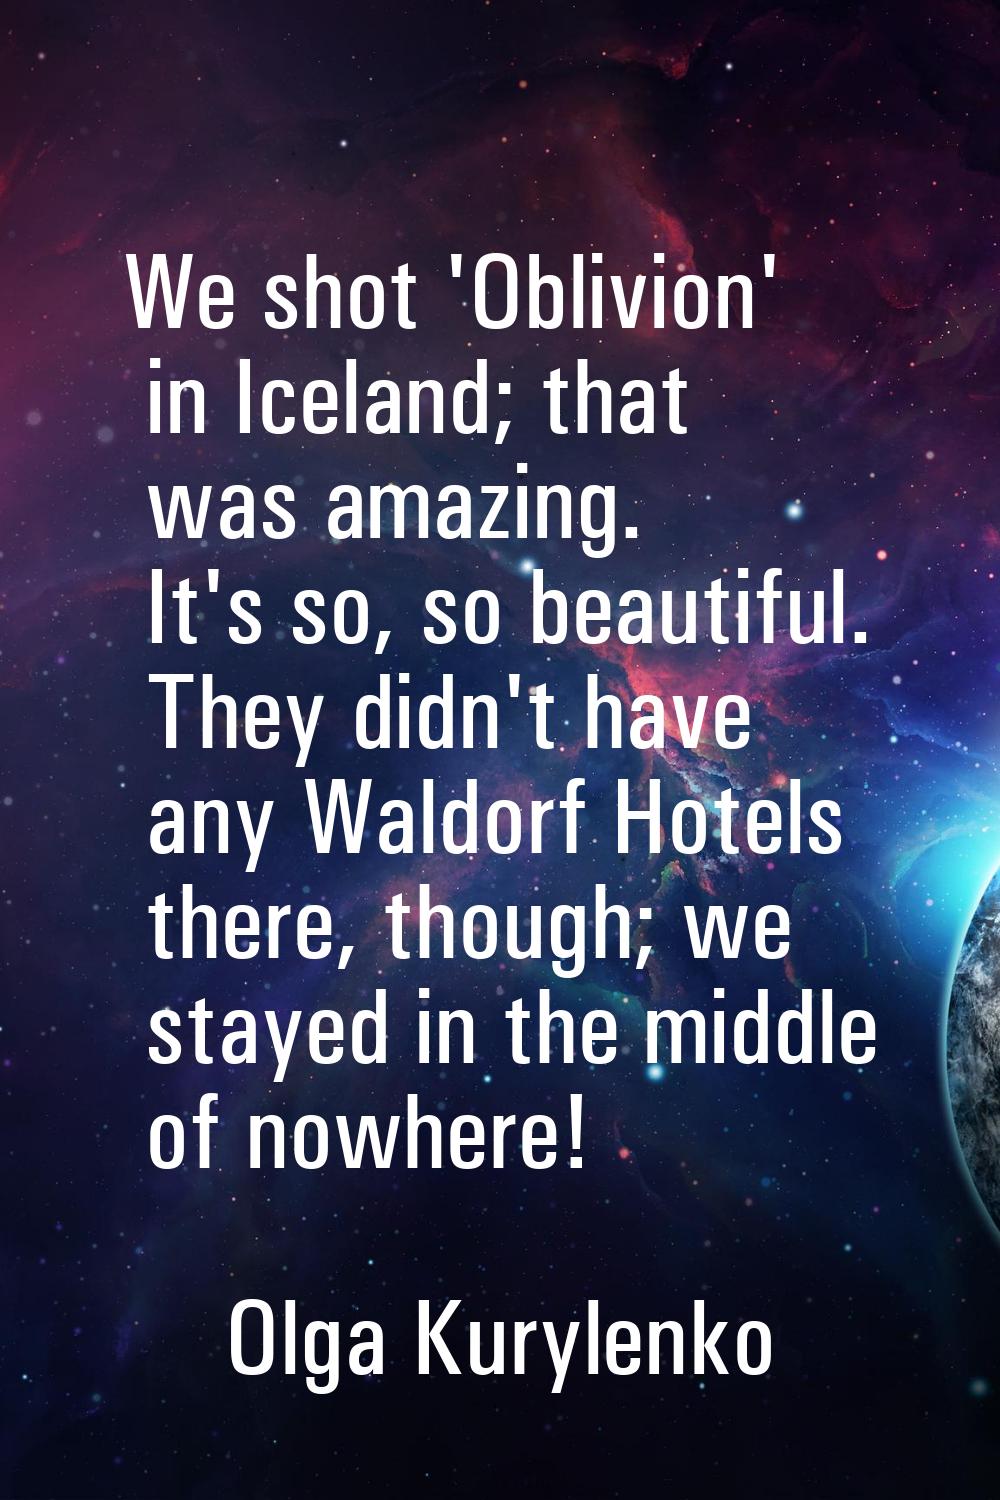 We shot 'Oblivion' in Iceland; that was amazing. It's so, so beautiful. They didn't have any Waldor